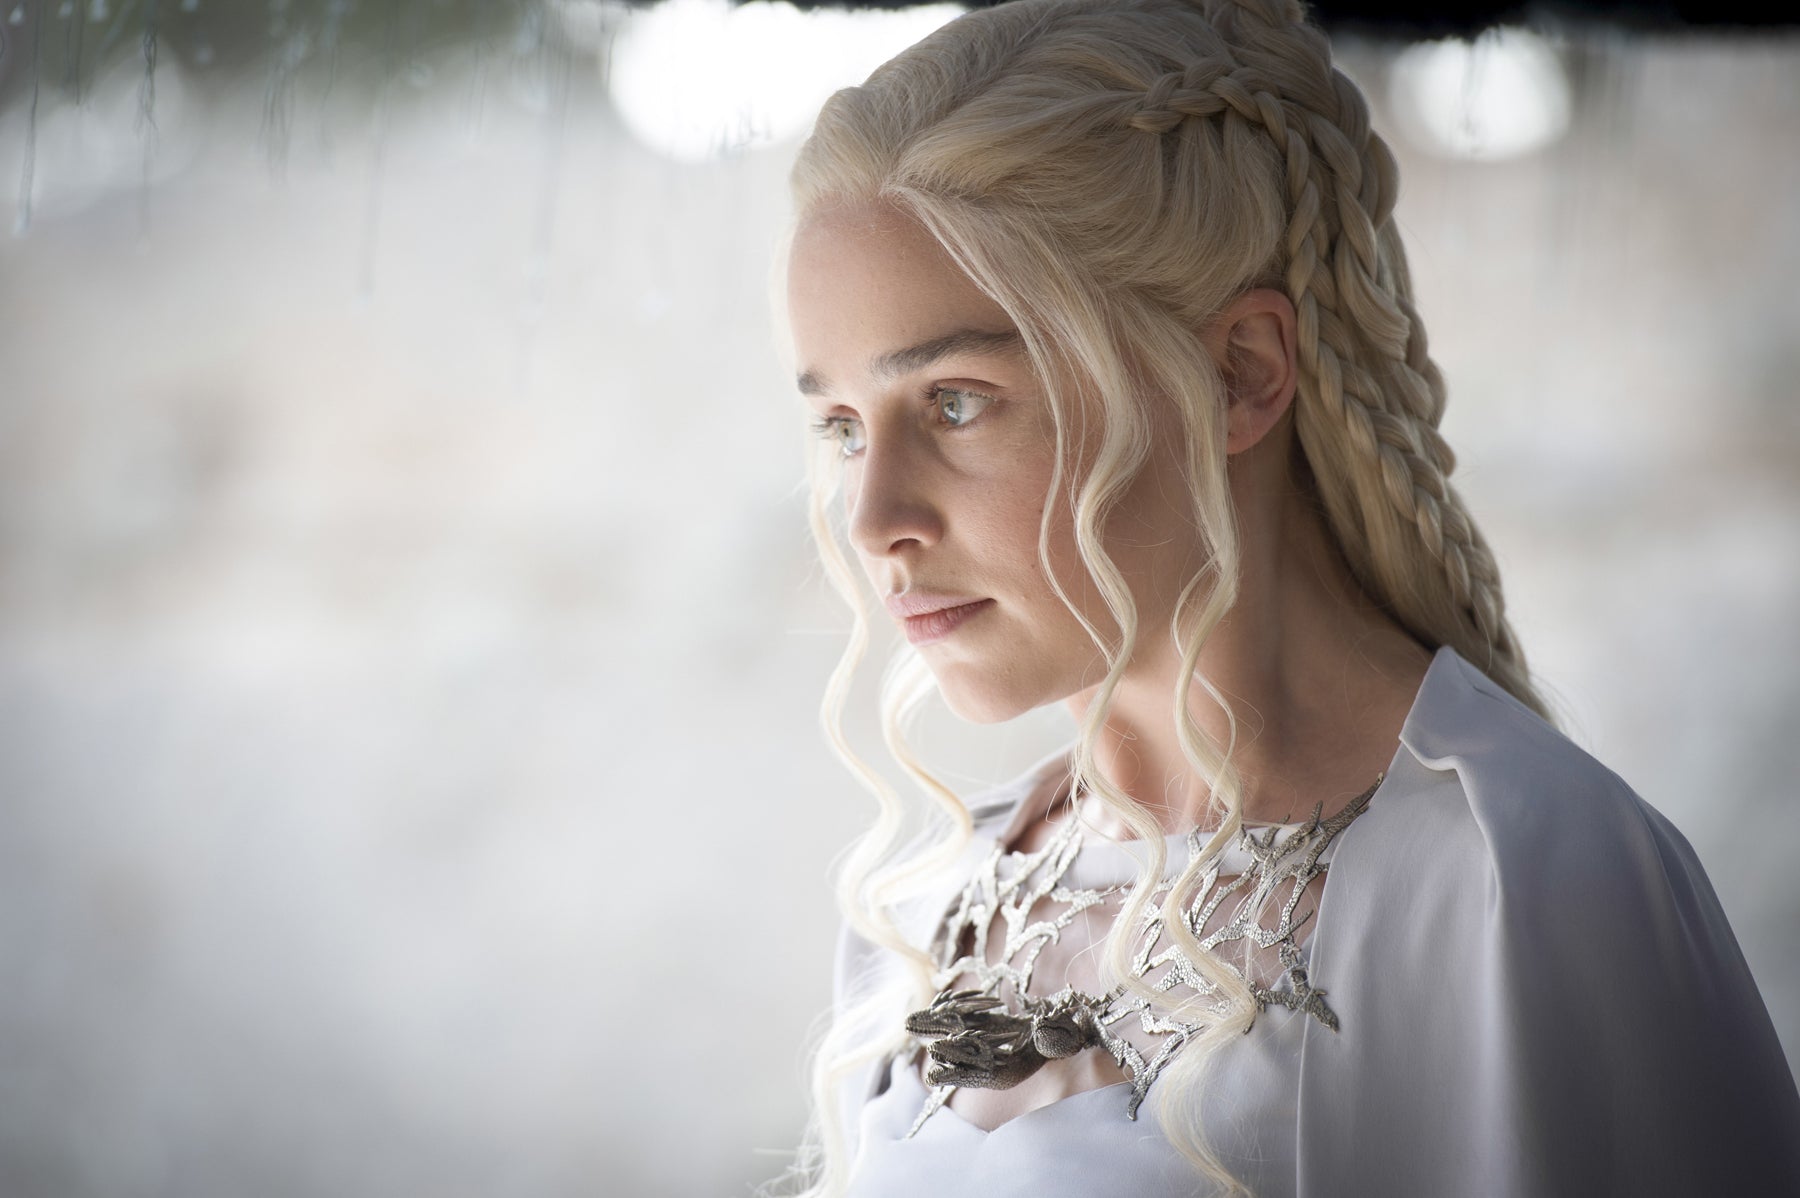 Daenerys, appearing angry, looks off-camera. 